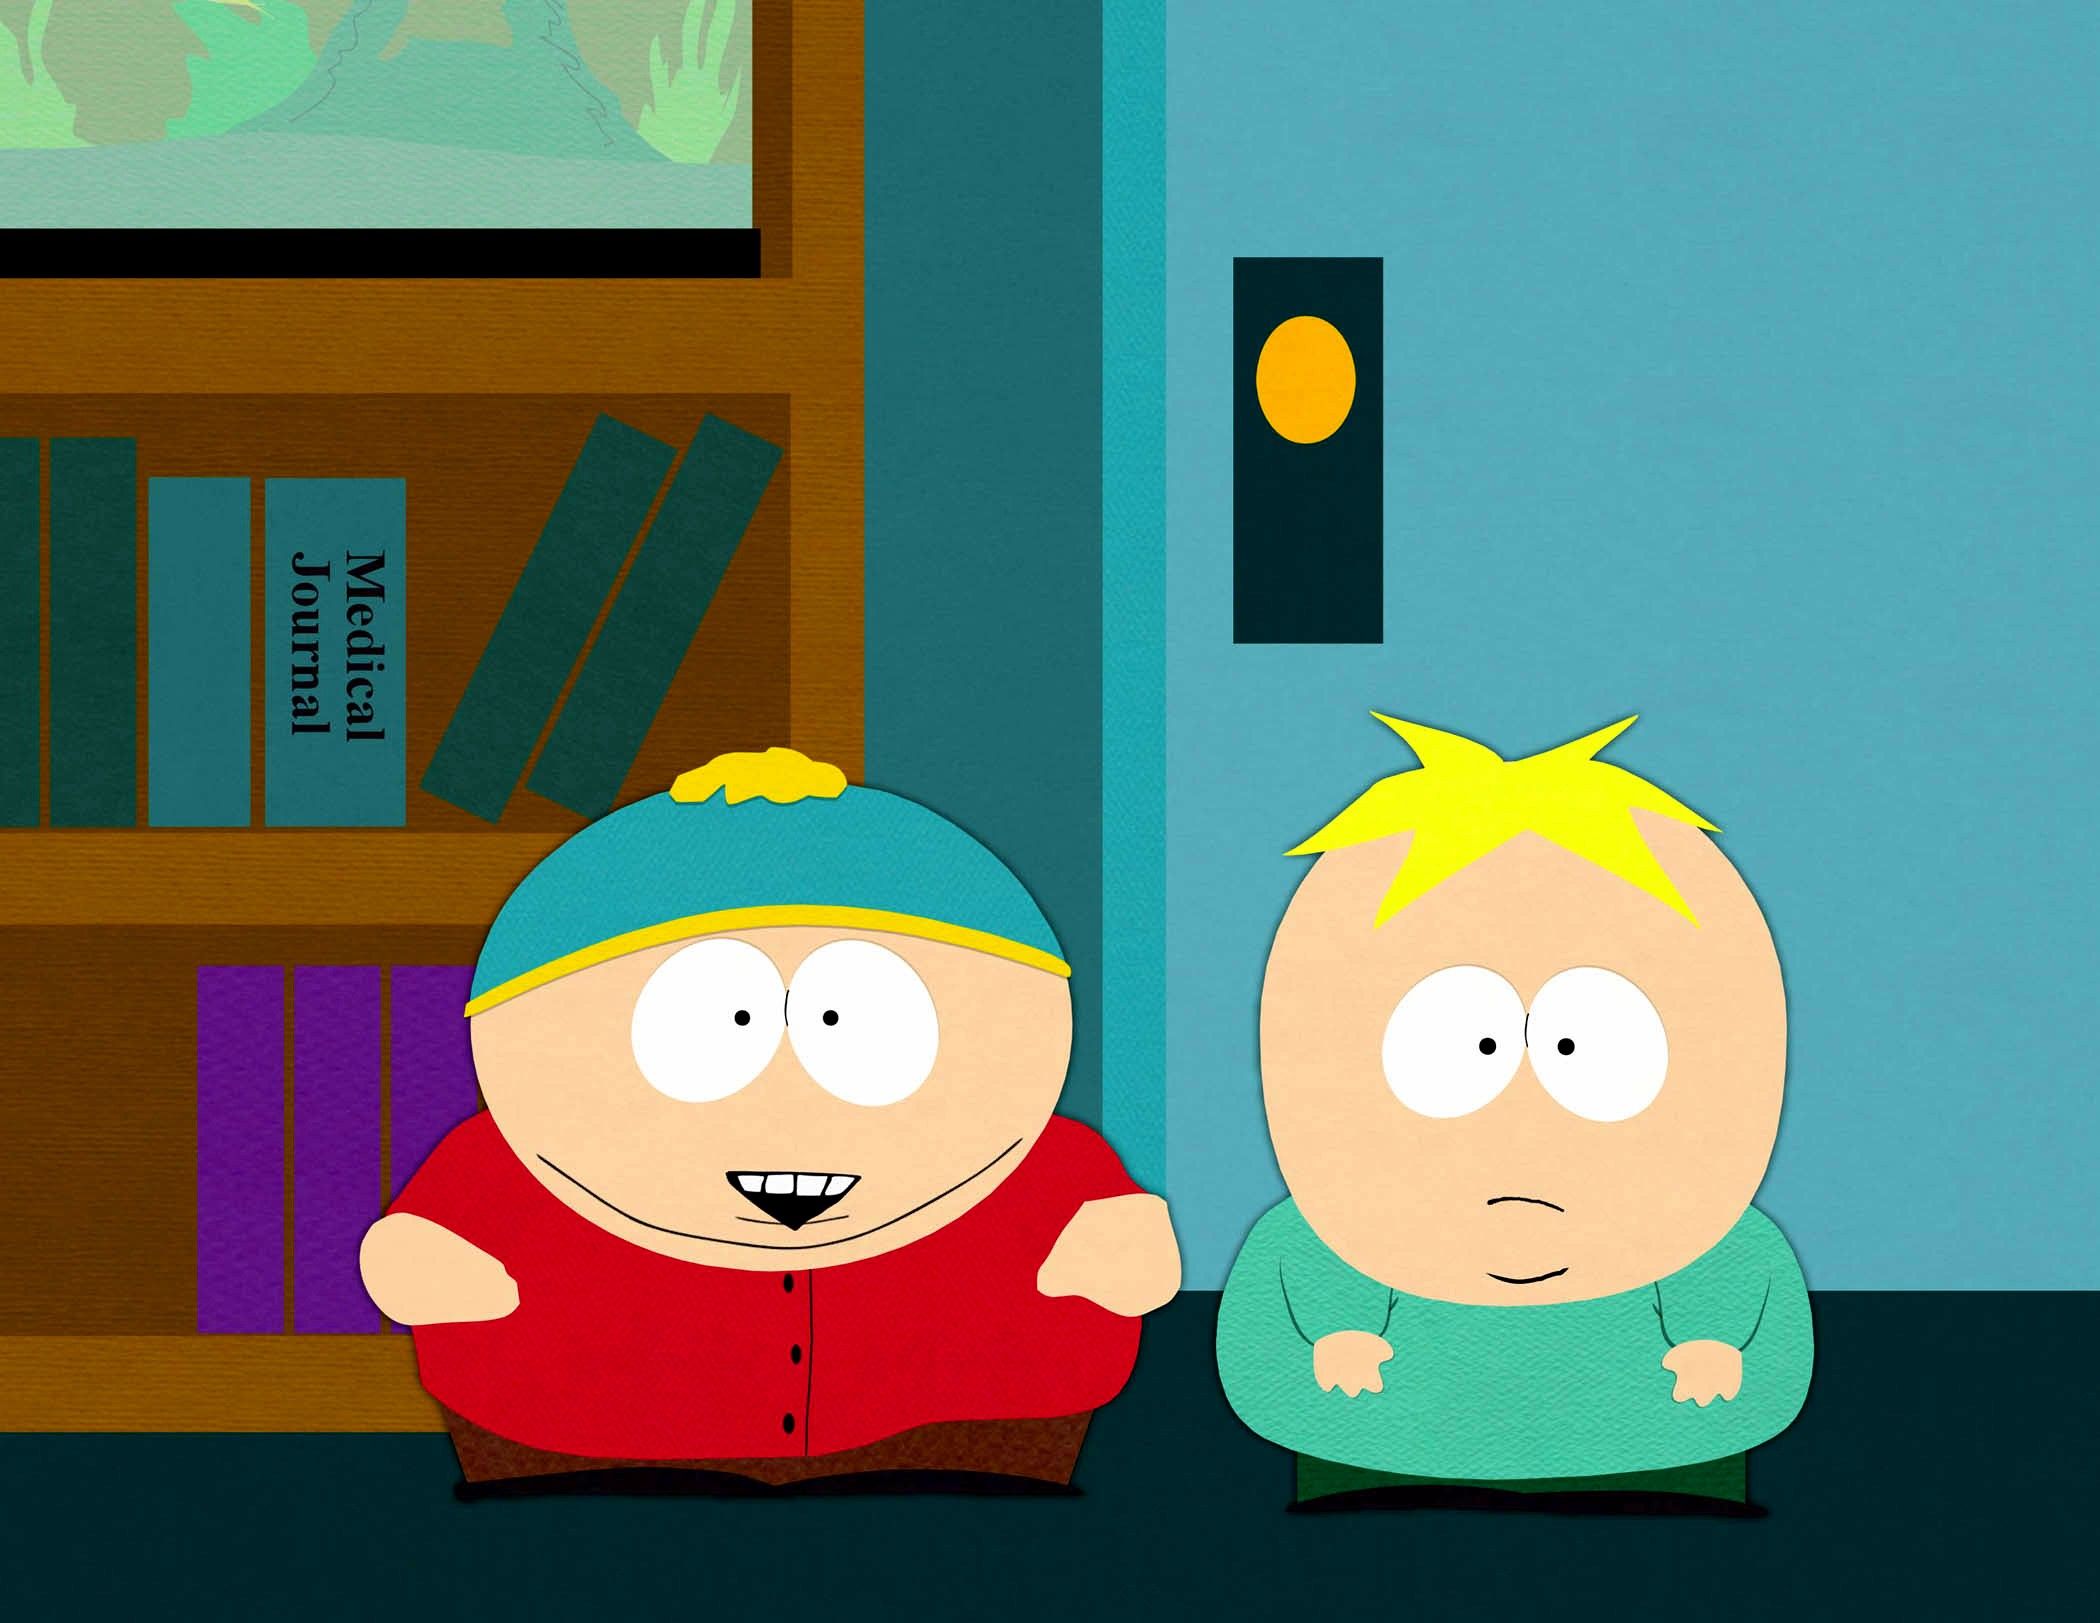 South Park Cartman and Butters